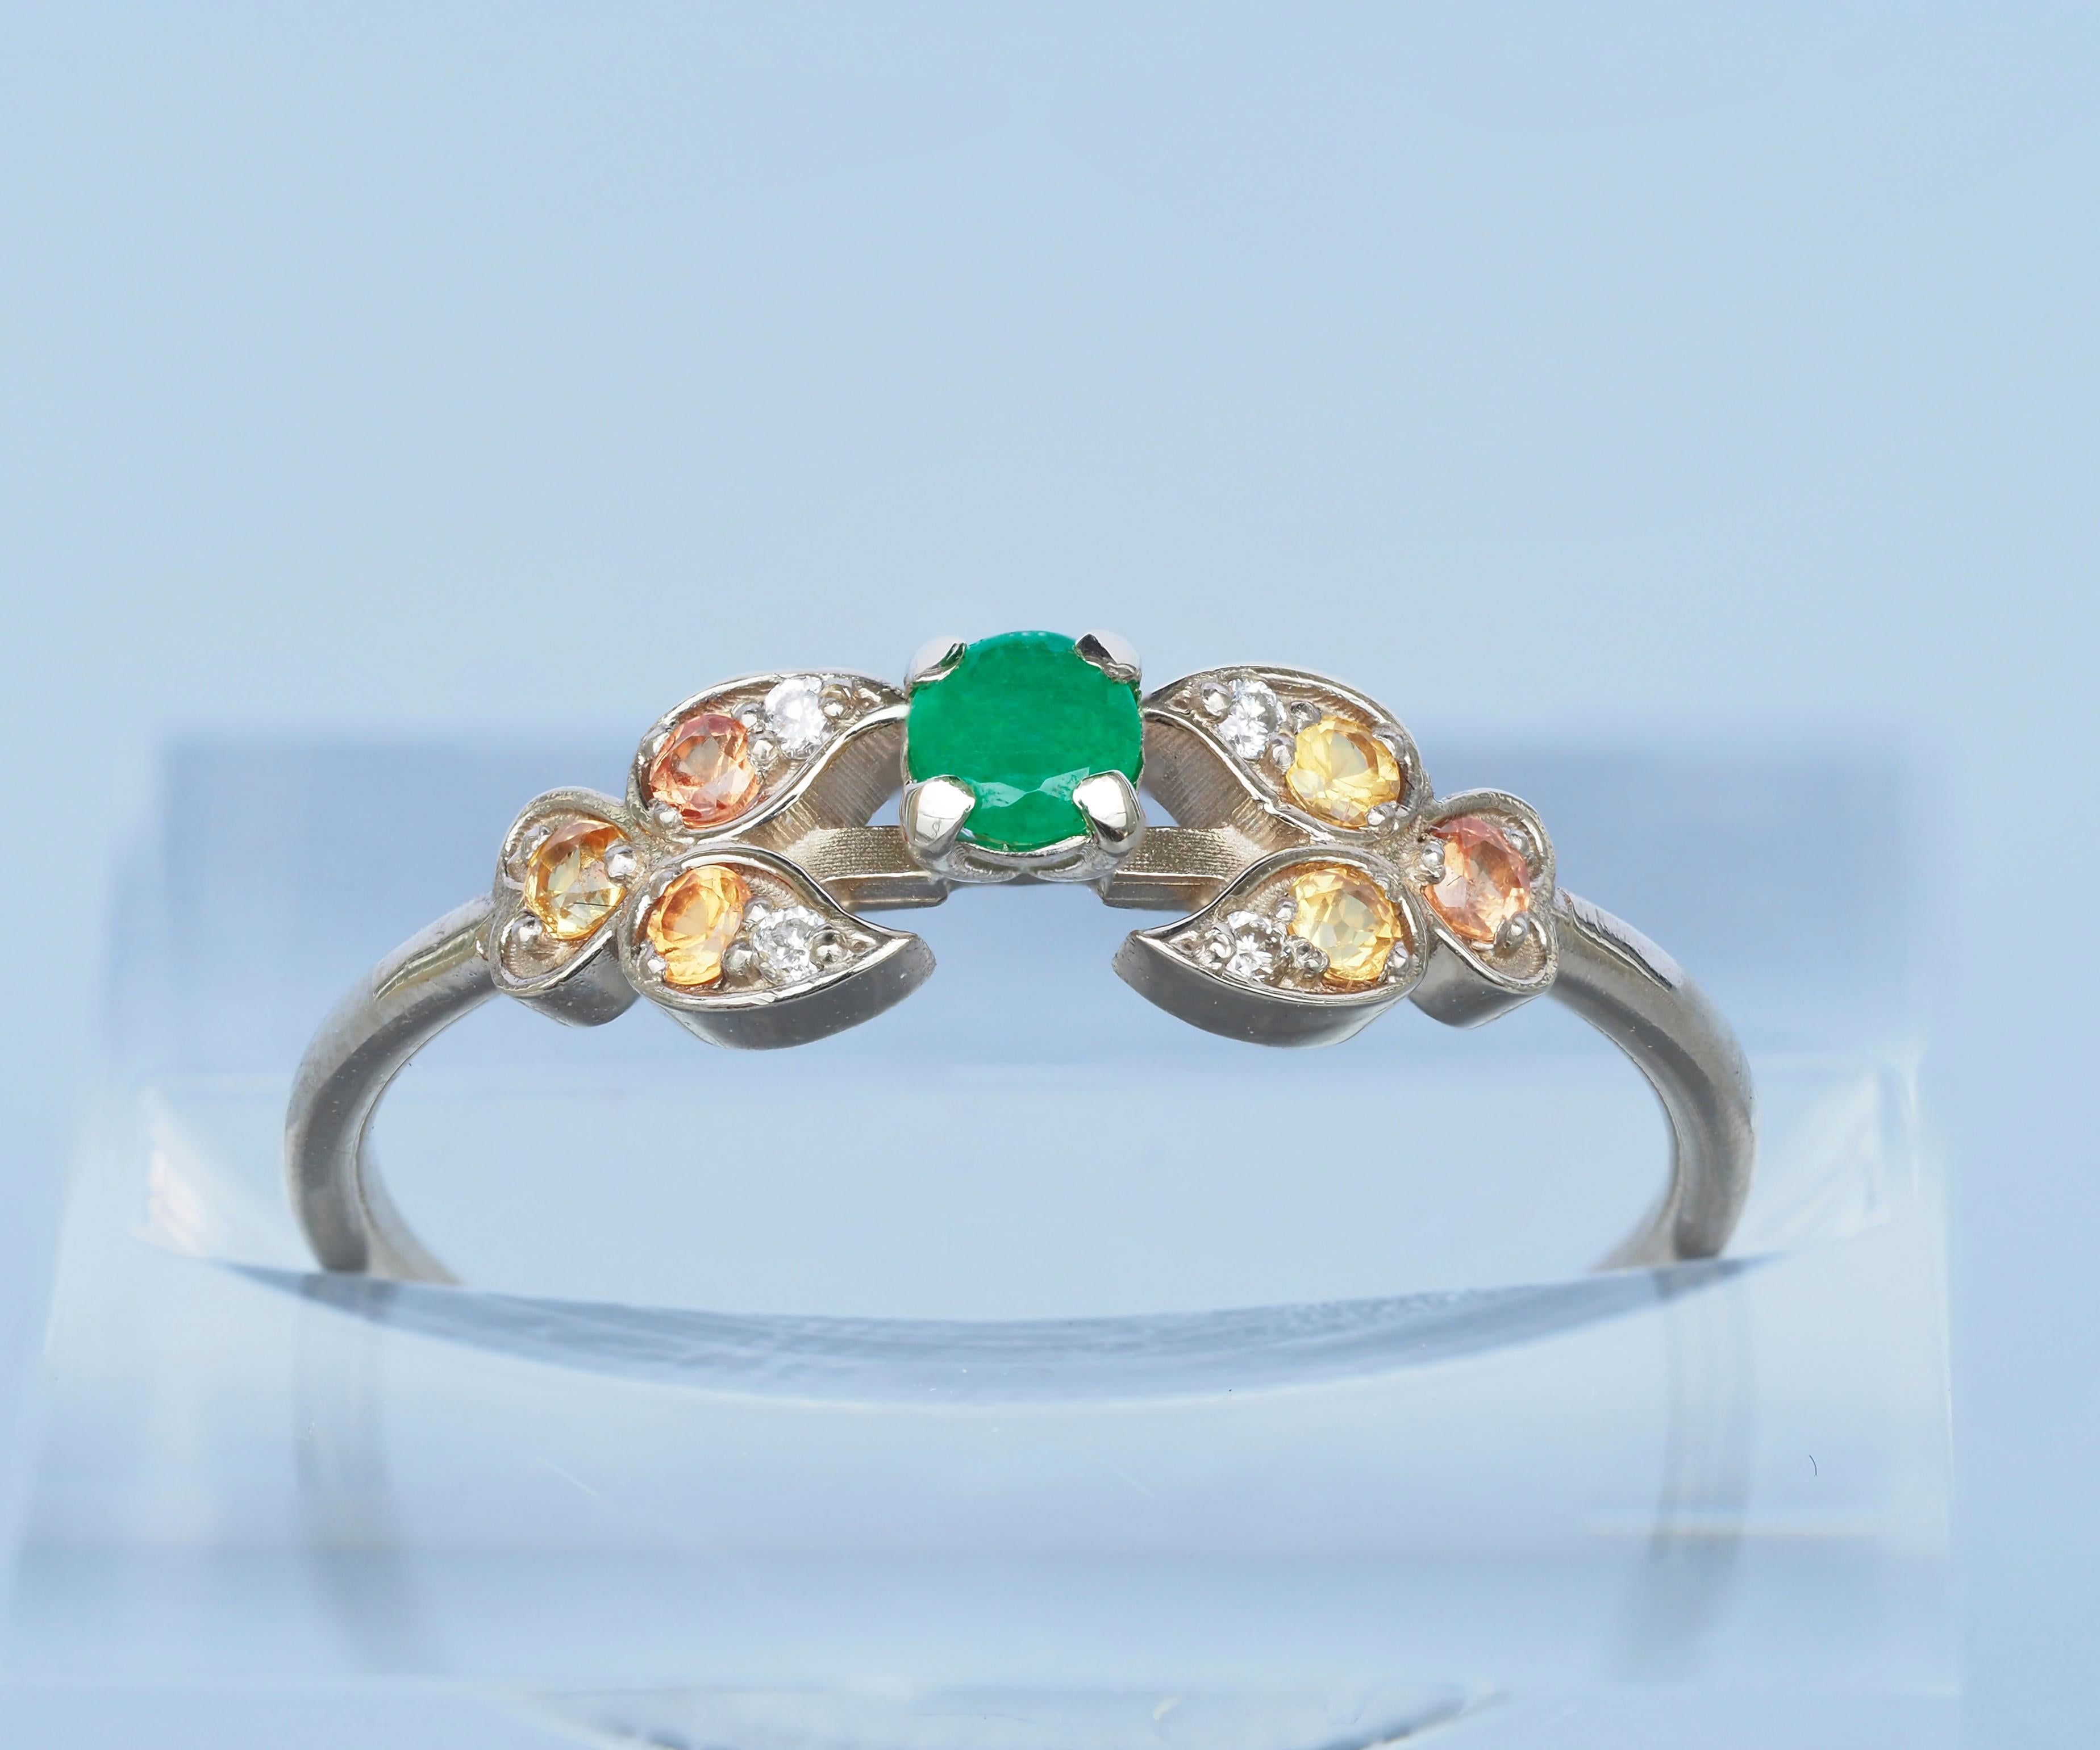 For Sale:  Emerald, Diamonds and Sapphires ring in 14k gold. Tiny ring 5